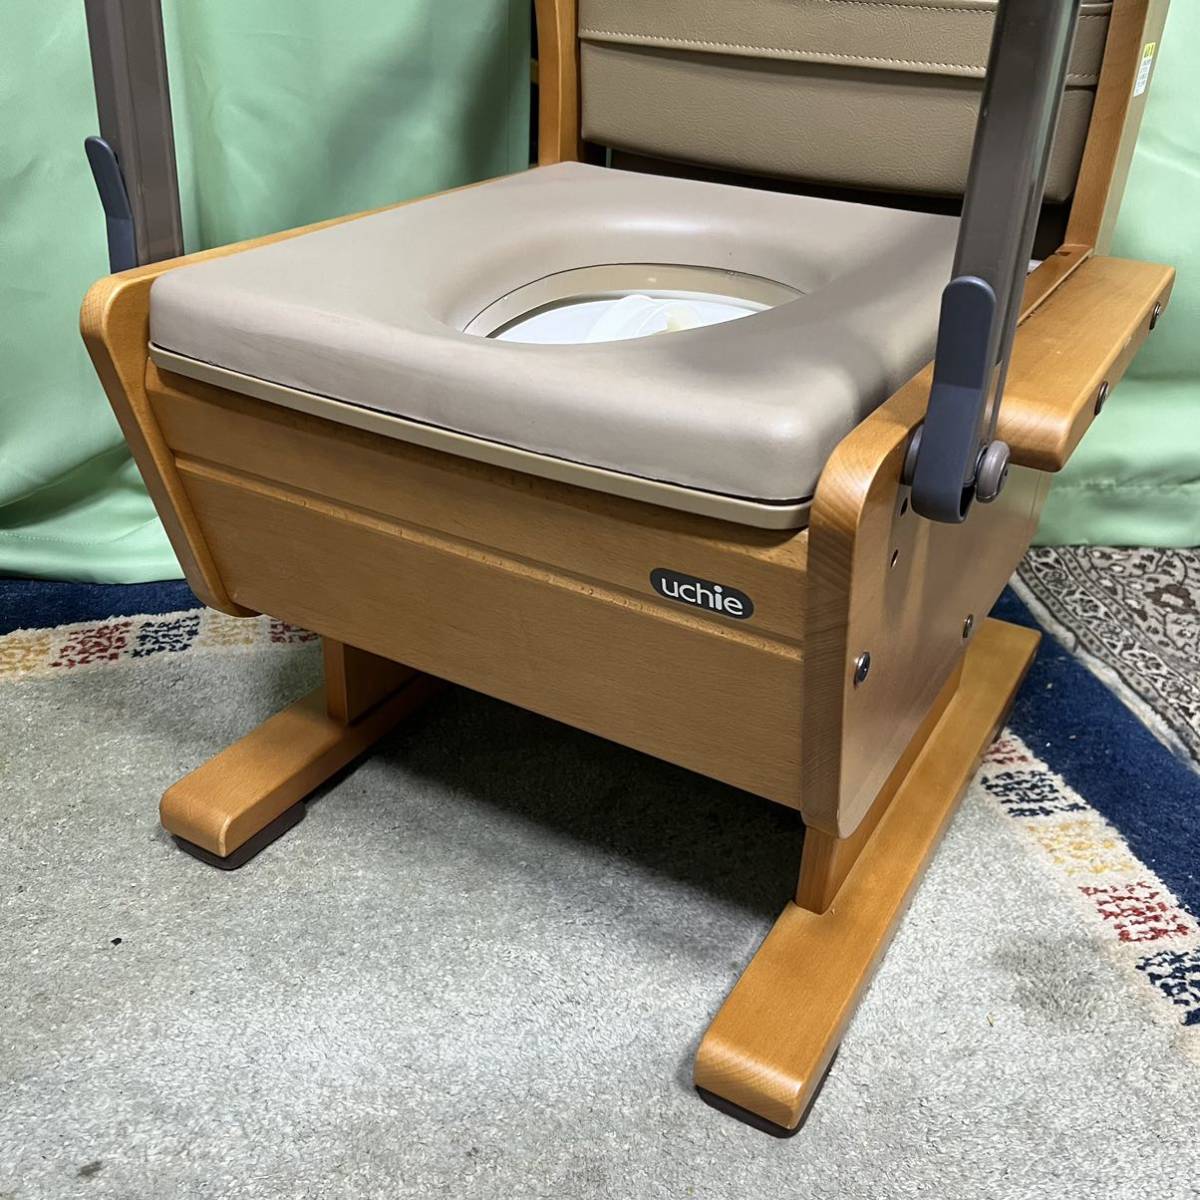 [200004]uchie portable toilet wooden armrest . tip-up type .... chair TP